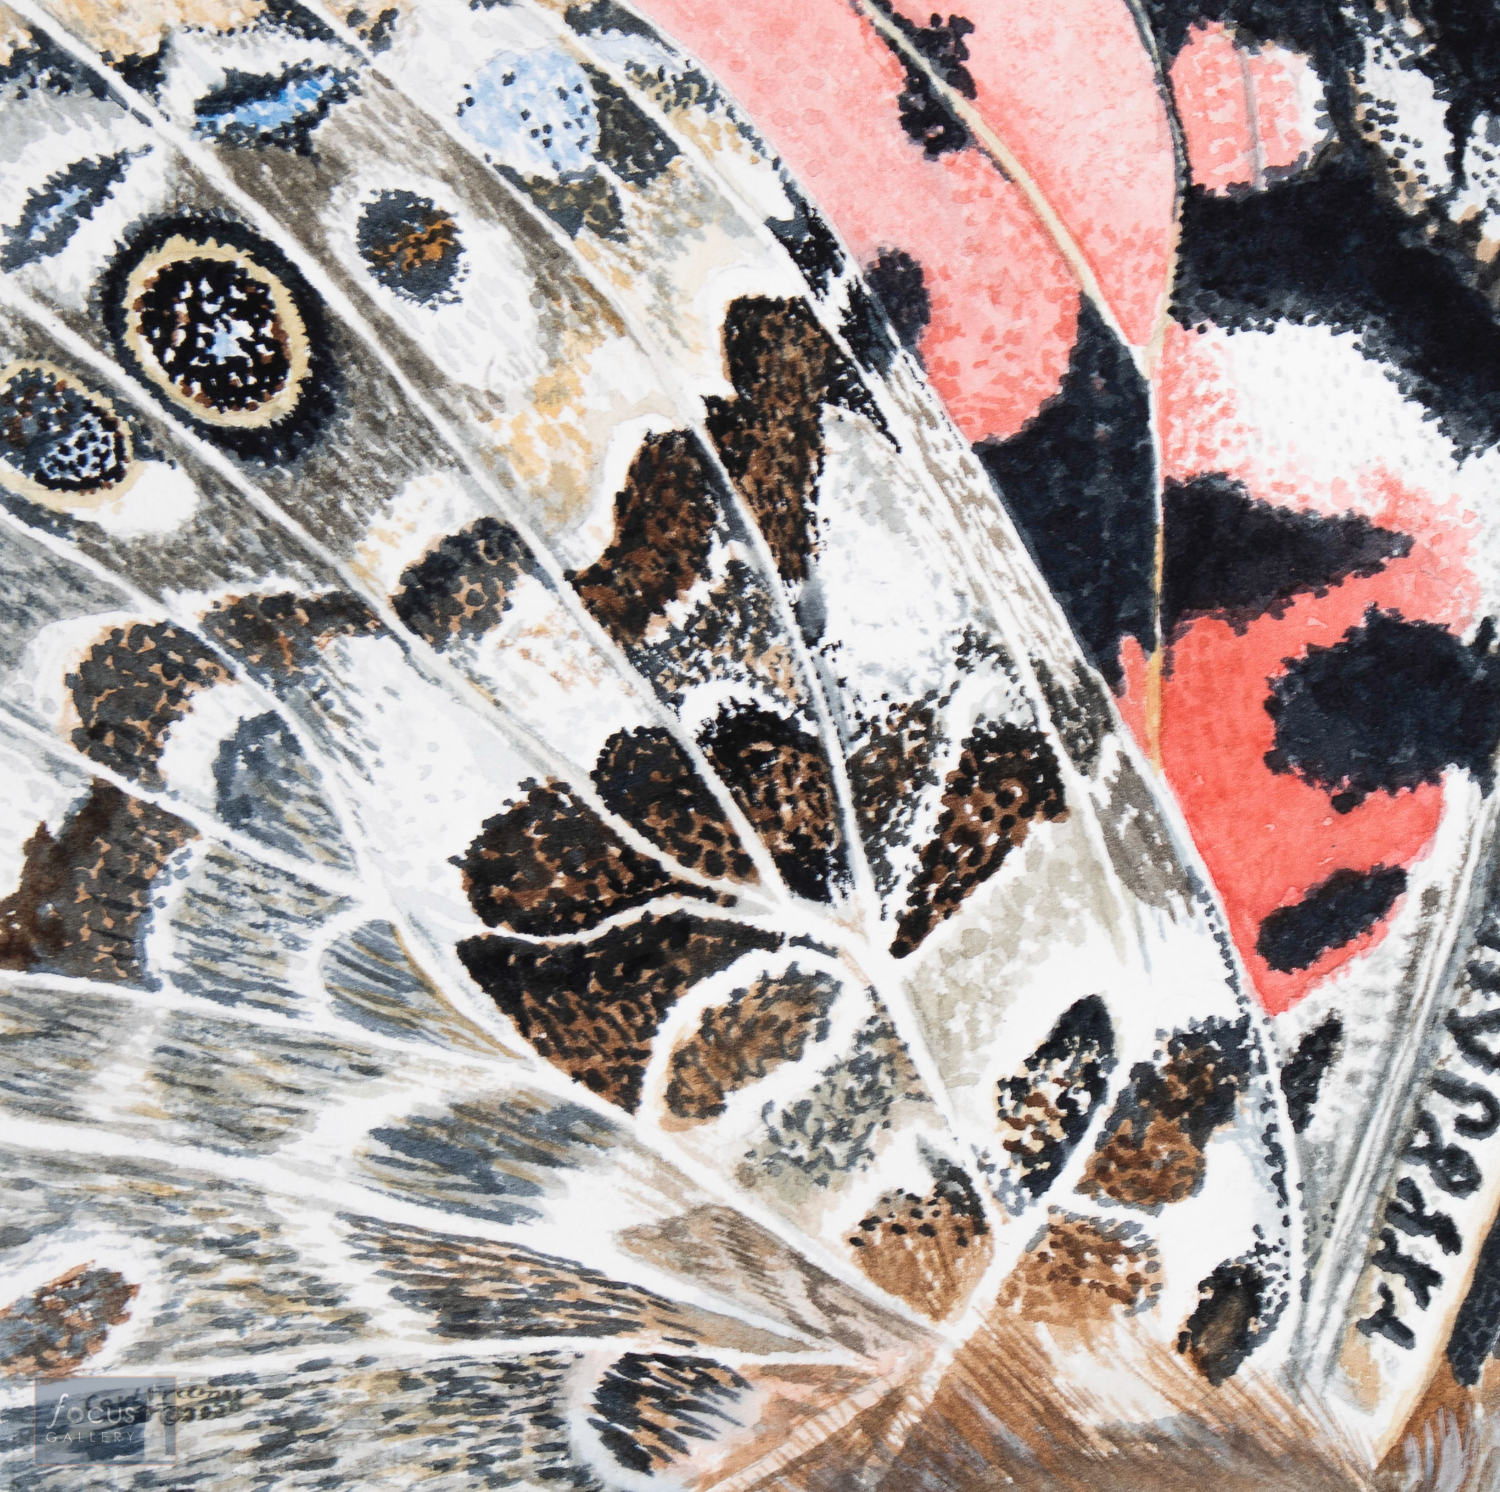 Original watercolor painting of the detail of the patterns on a Vanessa butterfly wing.